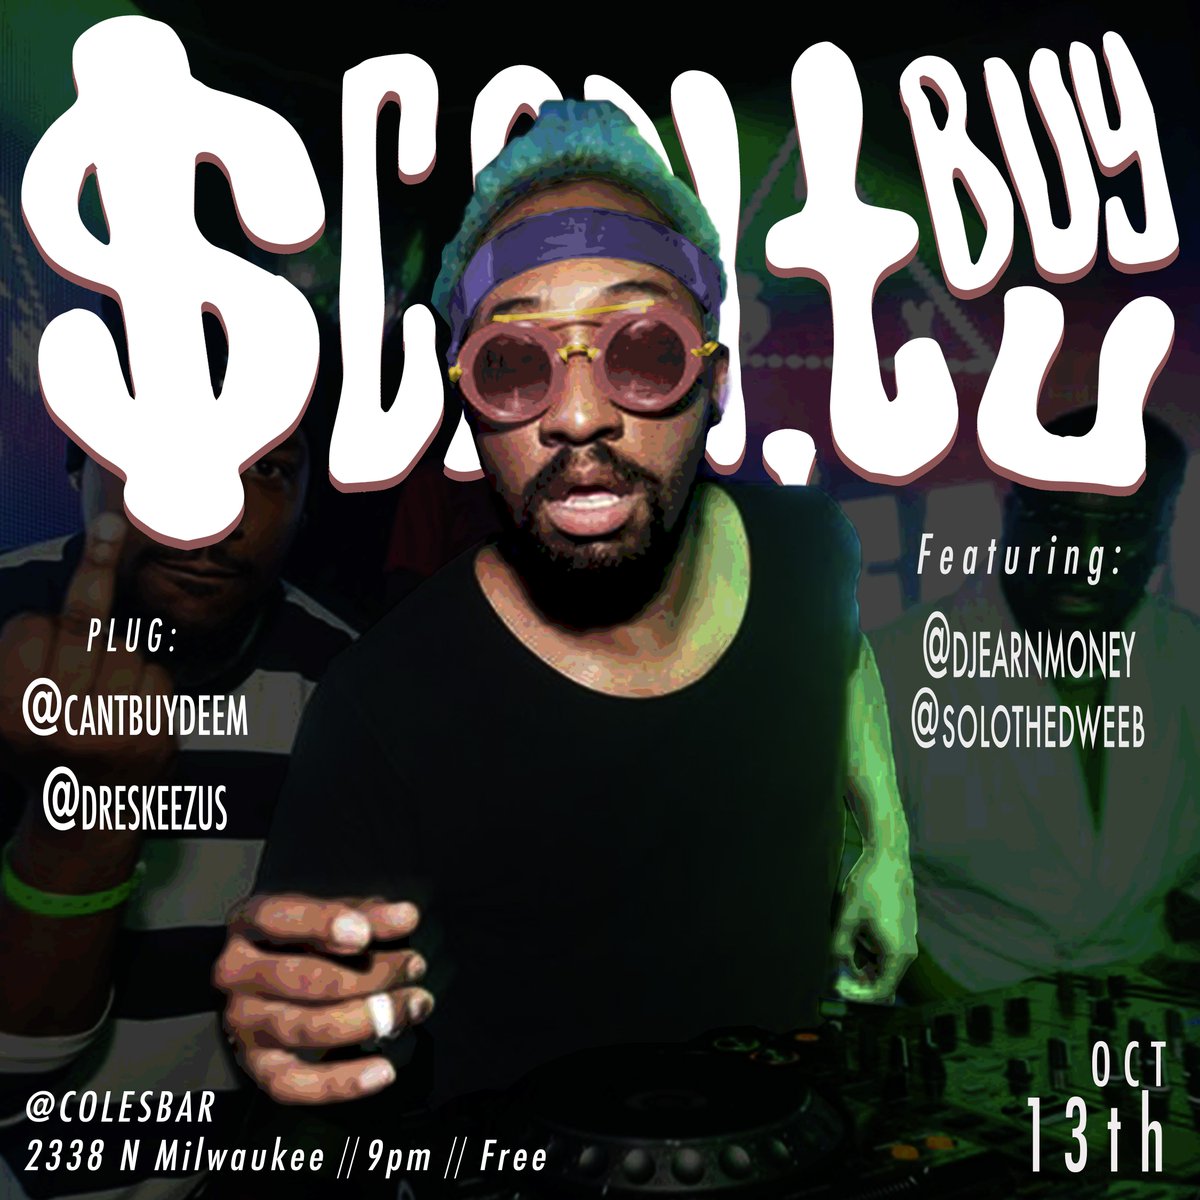 ✨{#EventAlert}✨ @DjEarnMoney will be on #DoubleDuty Performing & Spinning at Event 'Cant Buy U' Oct 13th @Colesbar along w/ @SolotheDweeb hosted by💰@cantbuydeem @dreSKEEZUS💰 Doors open at 9pm *** #FREE99 ***